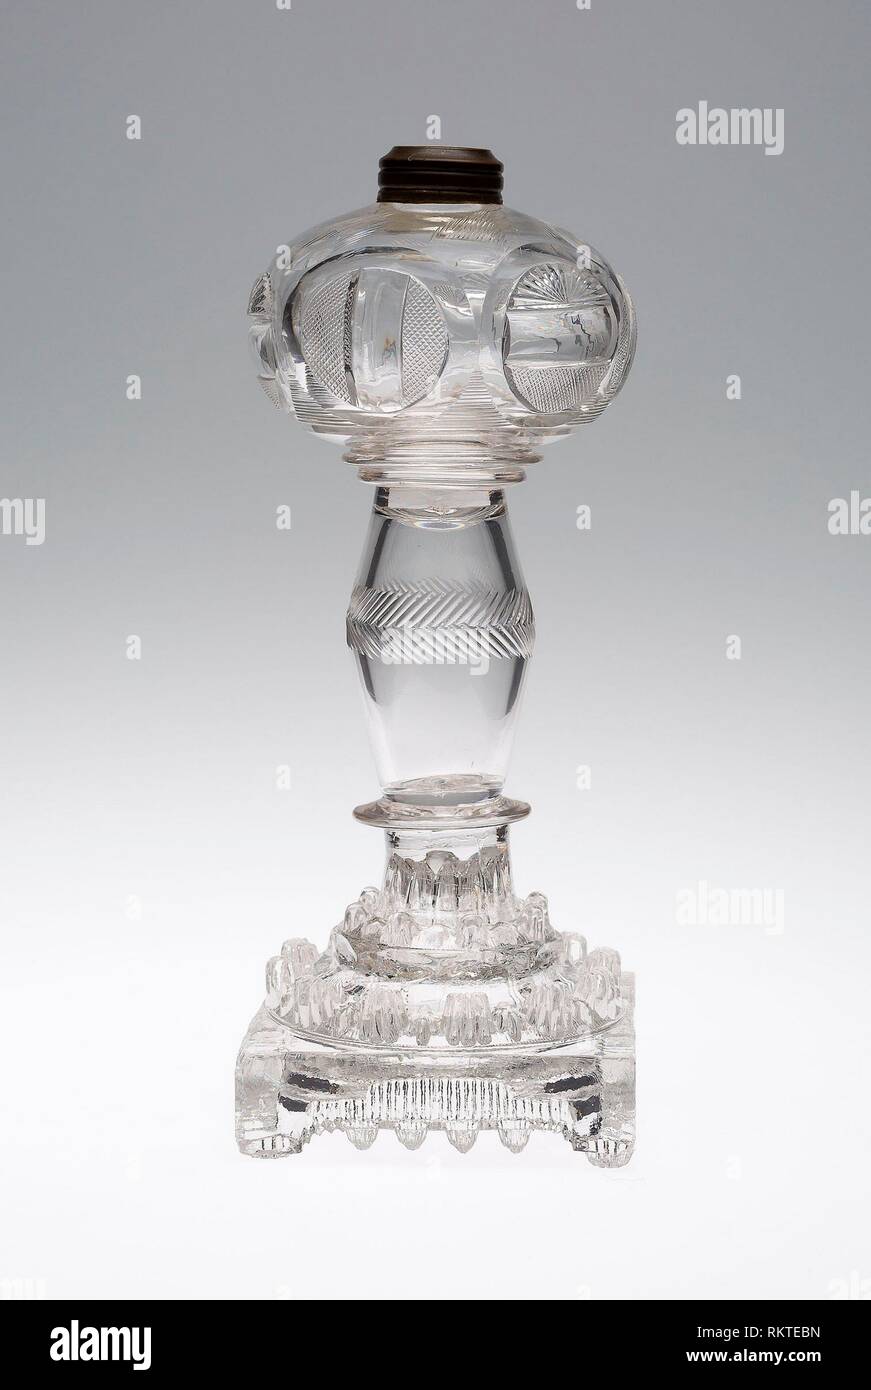 Lamp (one of a pair) - 1835/40 - Attributed to Union Flint Glass Works American, founded 1826 Kensington, Pennsylvania - Artist: Union Flint Glass Stock Photo